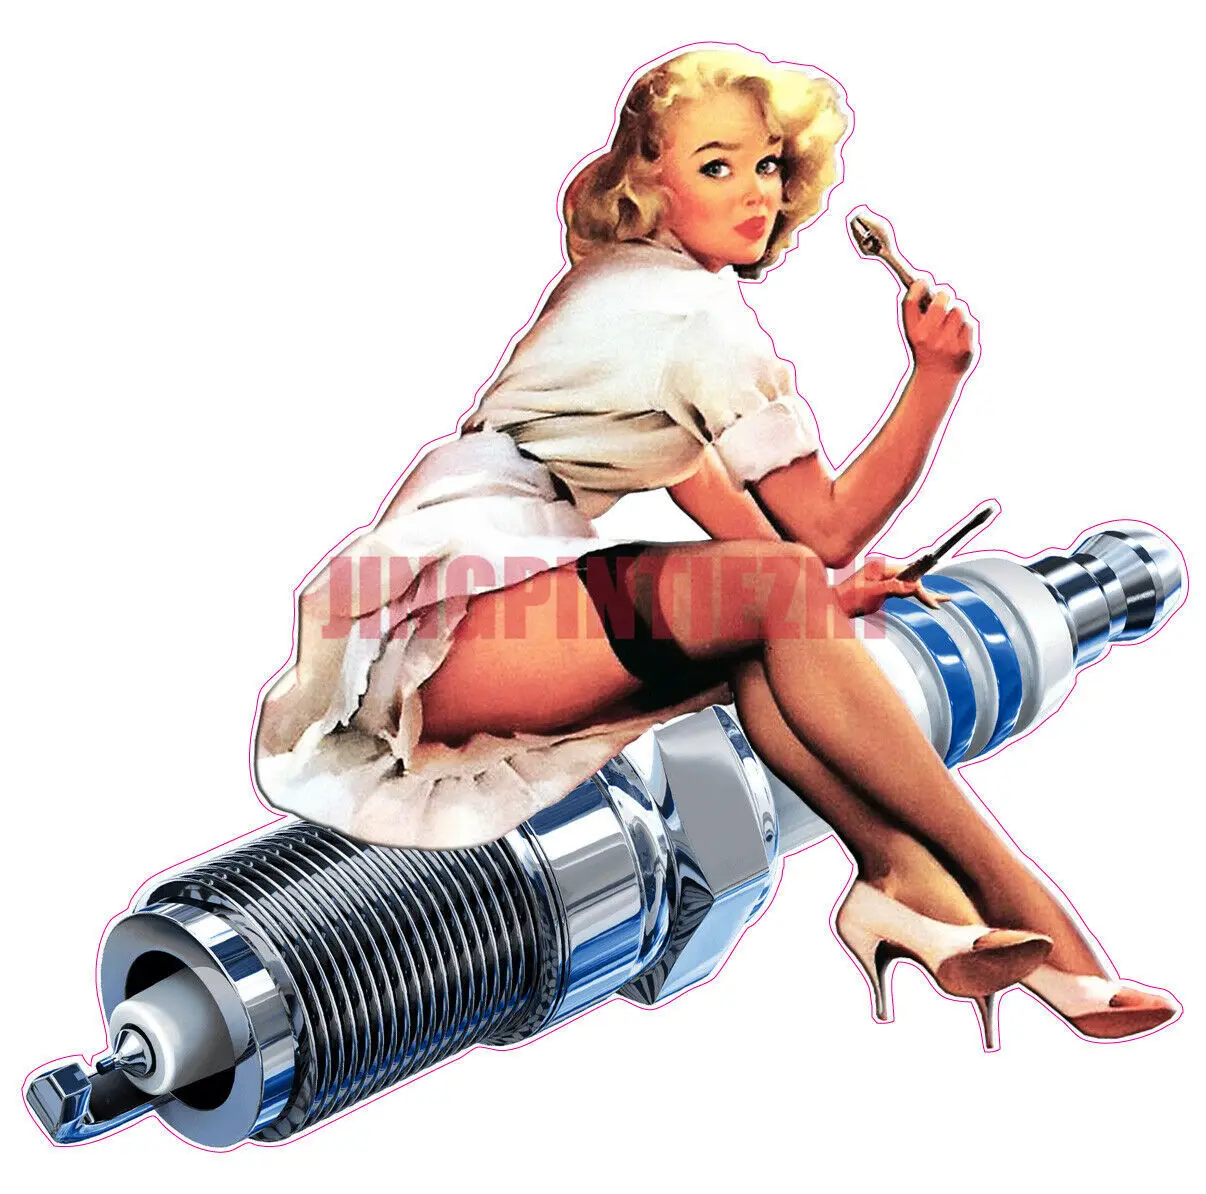 

Interesting Spark Plug Pin Up Girl Decal Free Shipping Vinyl Decals Racing Motorcycle Helmet Stickers